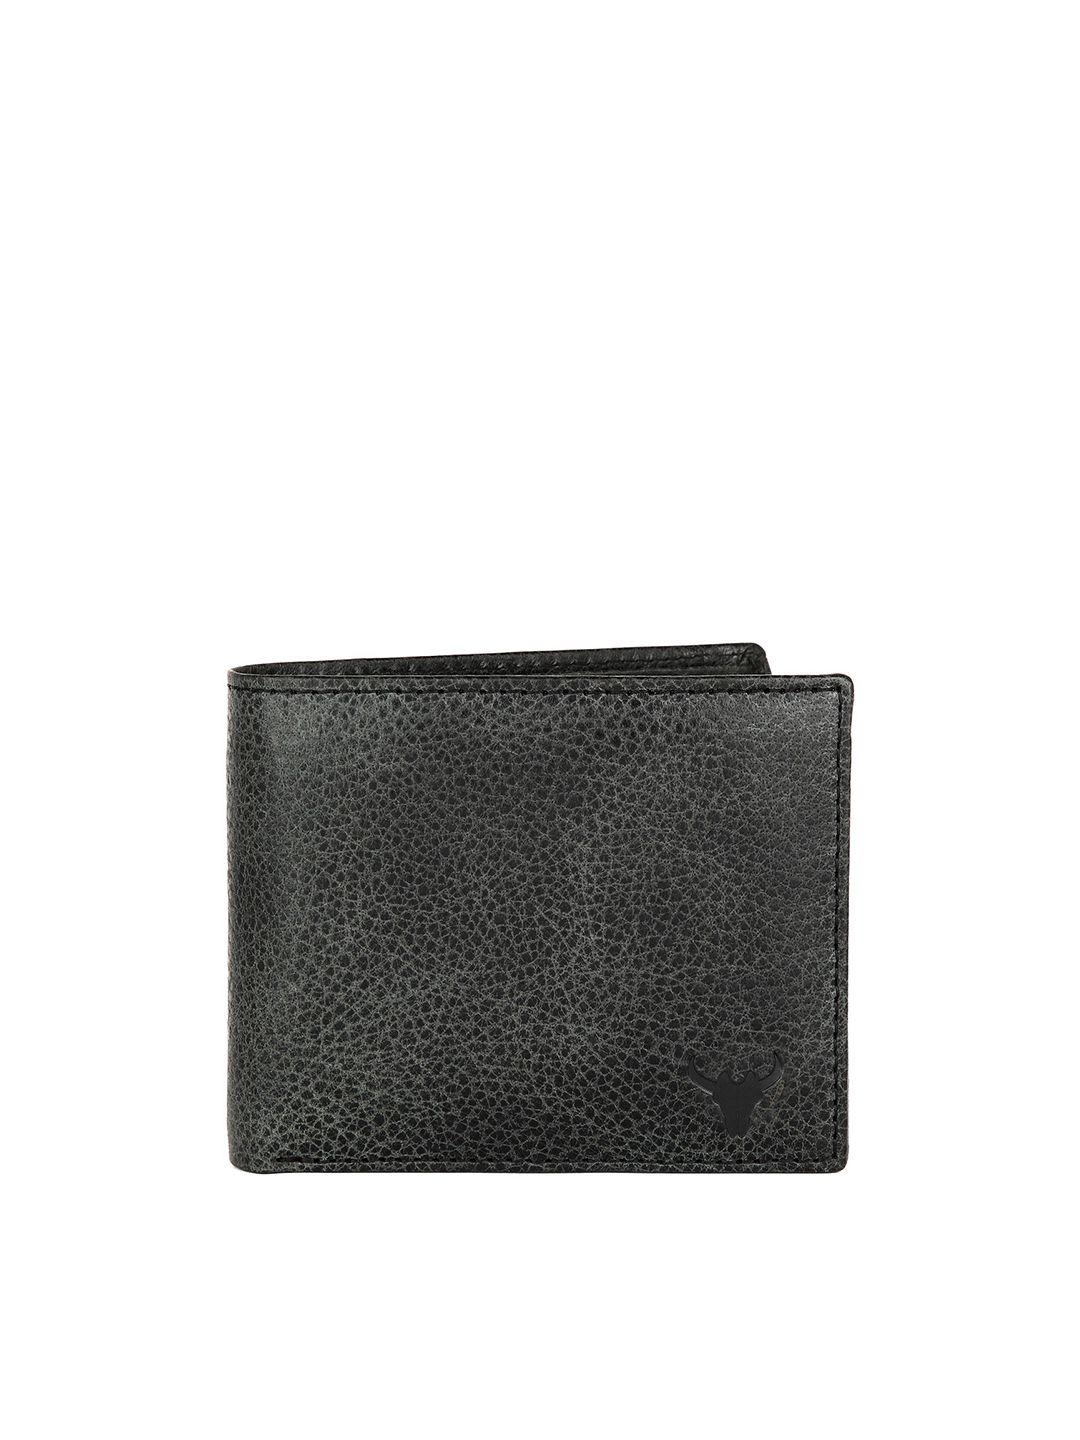 napa hide men black leather rfid textured two fold wallet